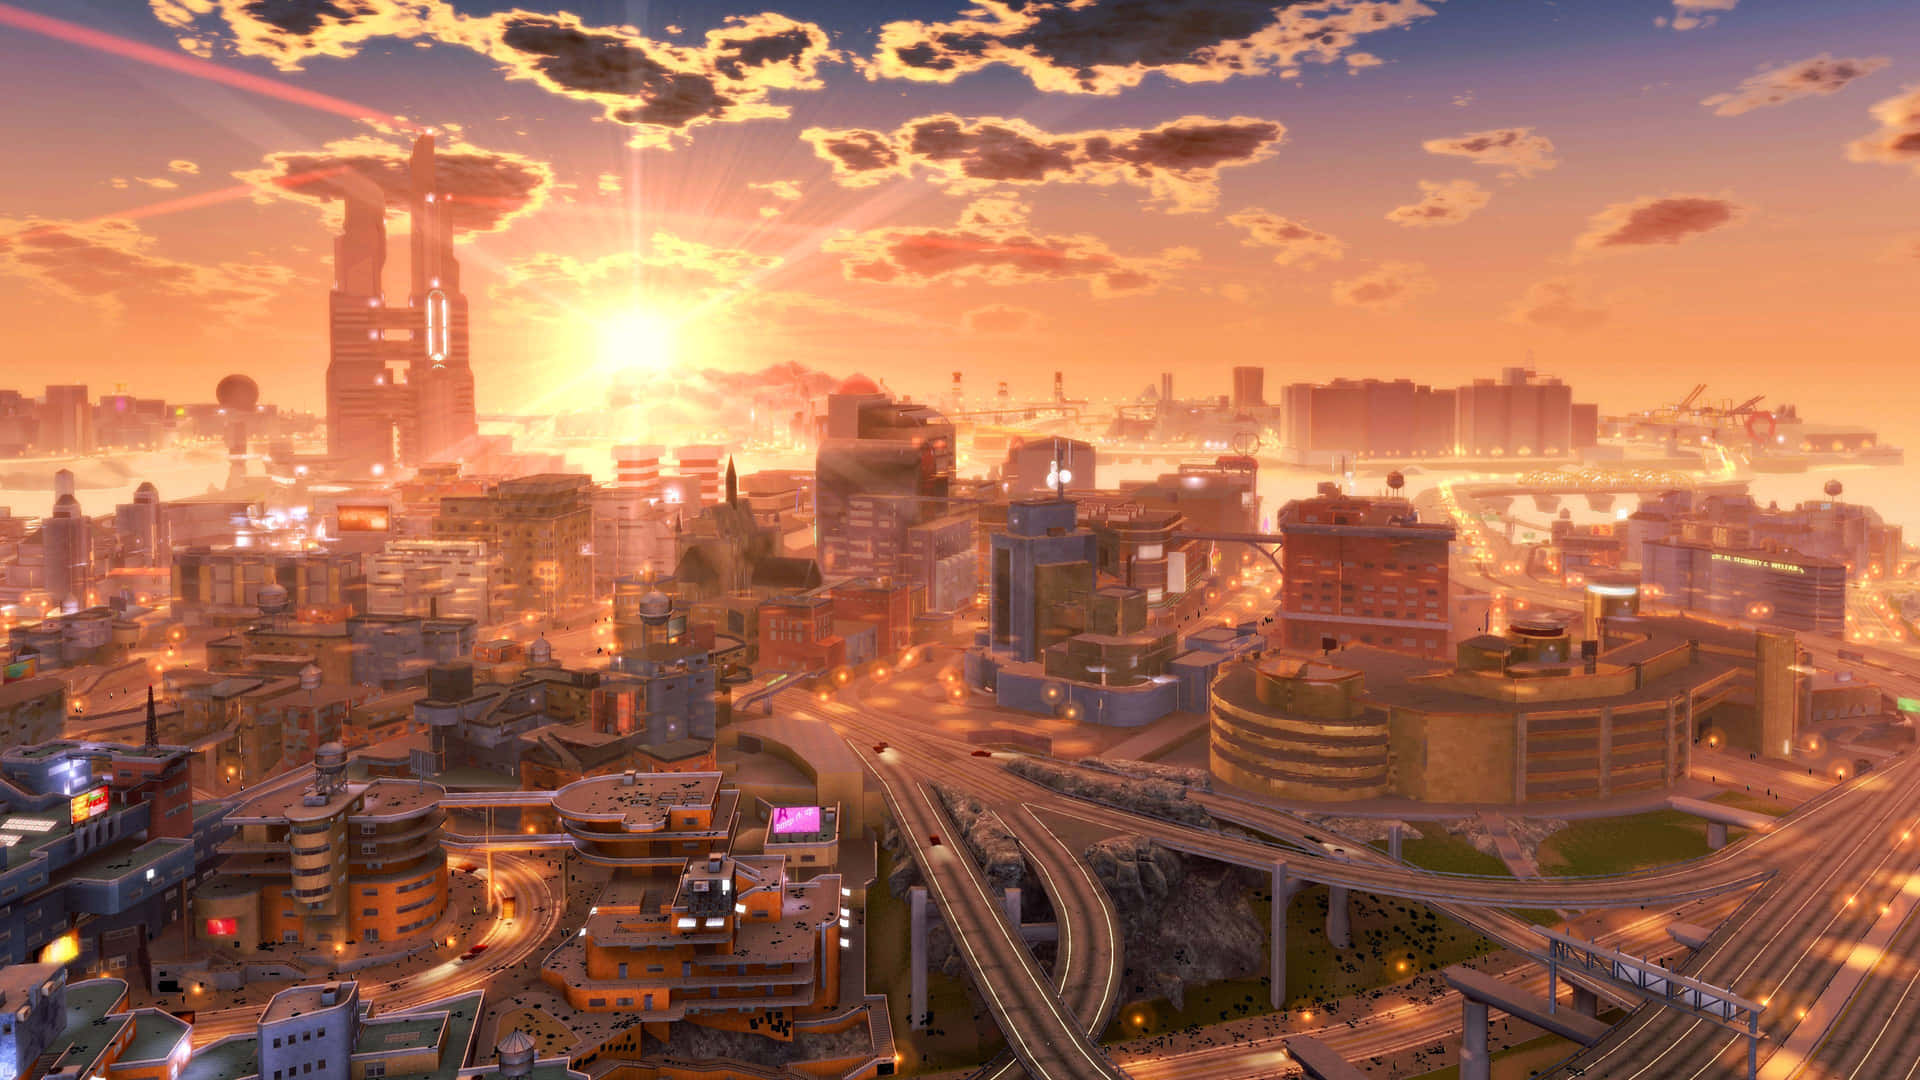 A City With A Sunset In The Background Wallpaper